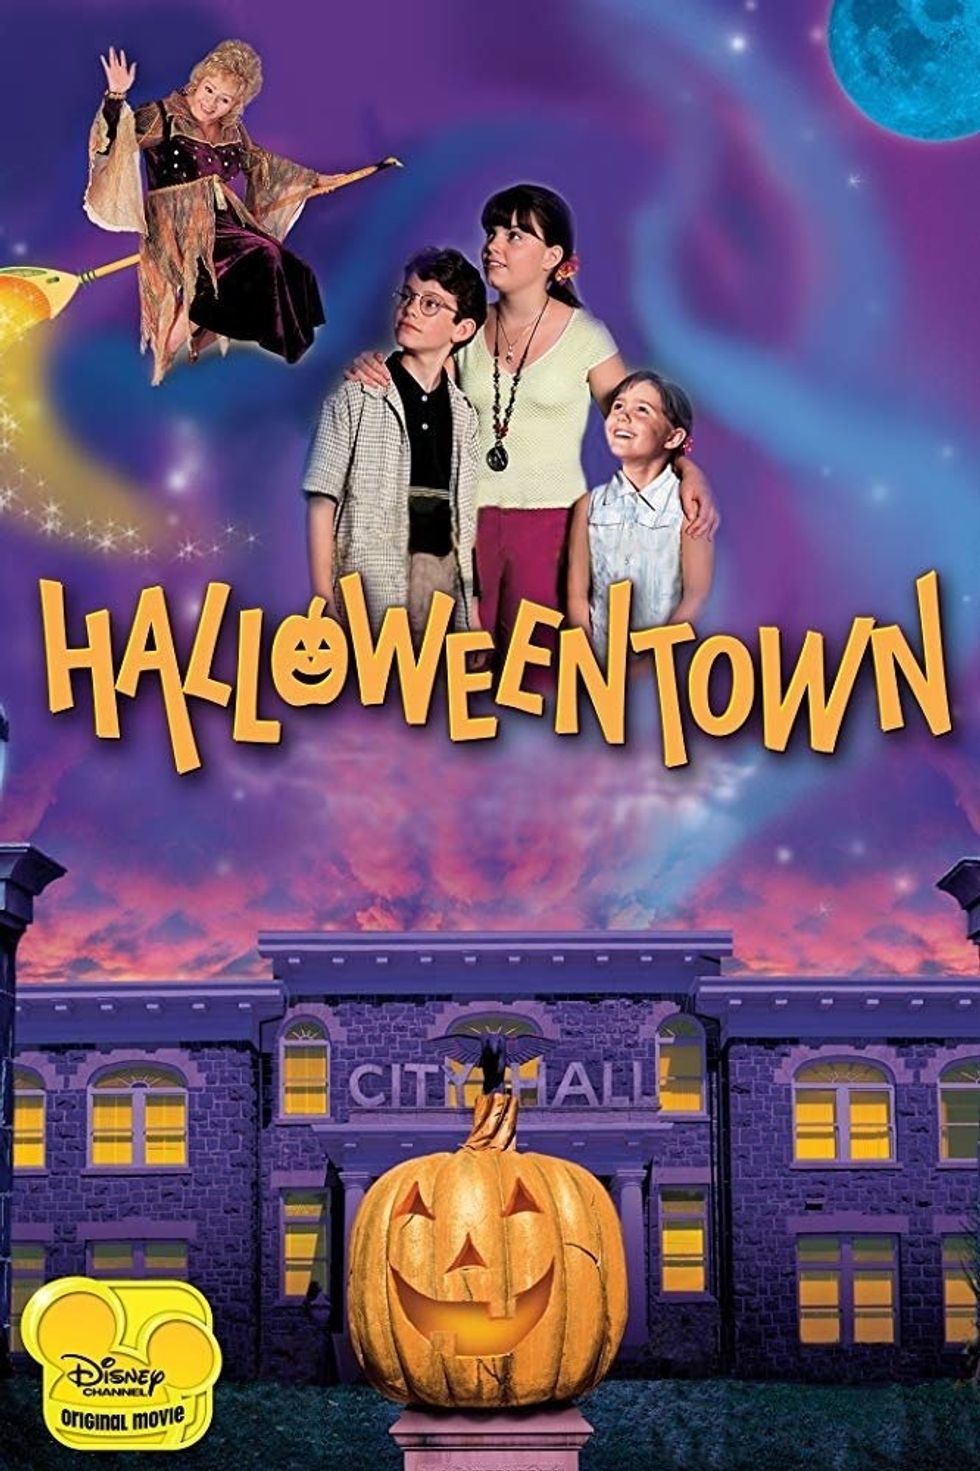 Find Out The Secrets Of "Halloweentown" This Spooky Season